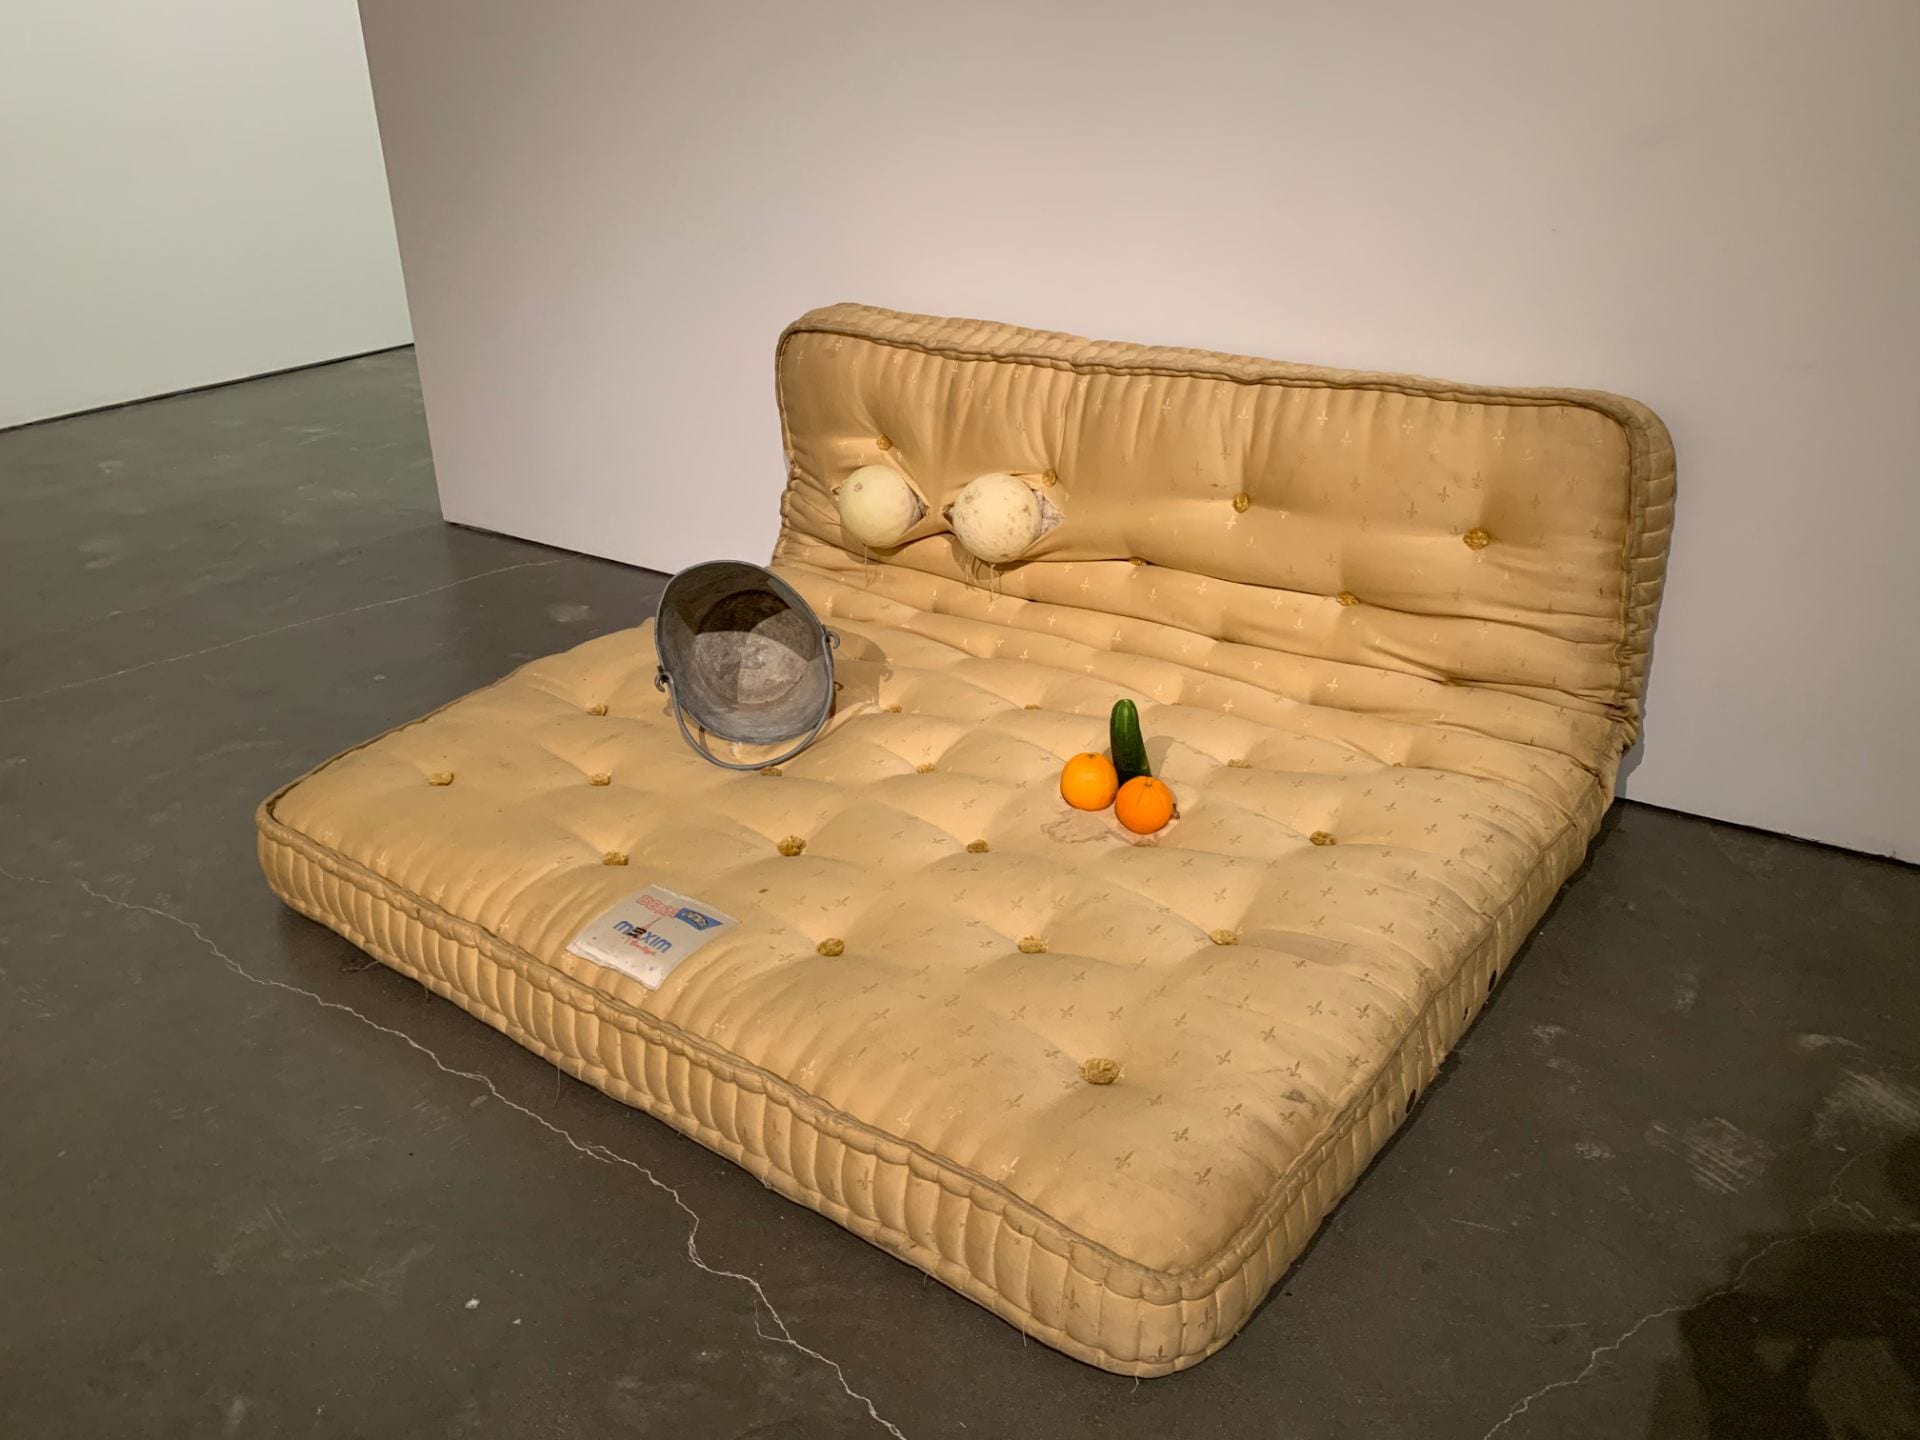 Sarah Lucas at the New Museum – visual research